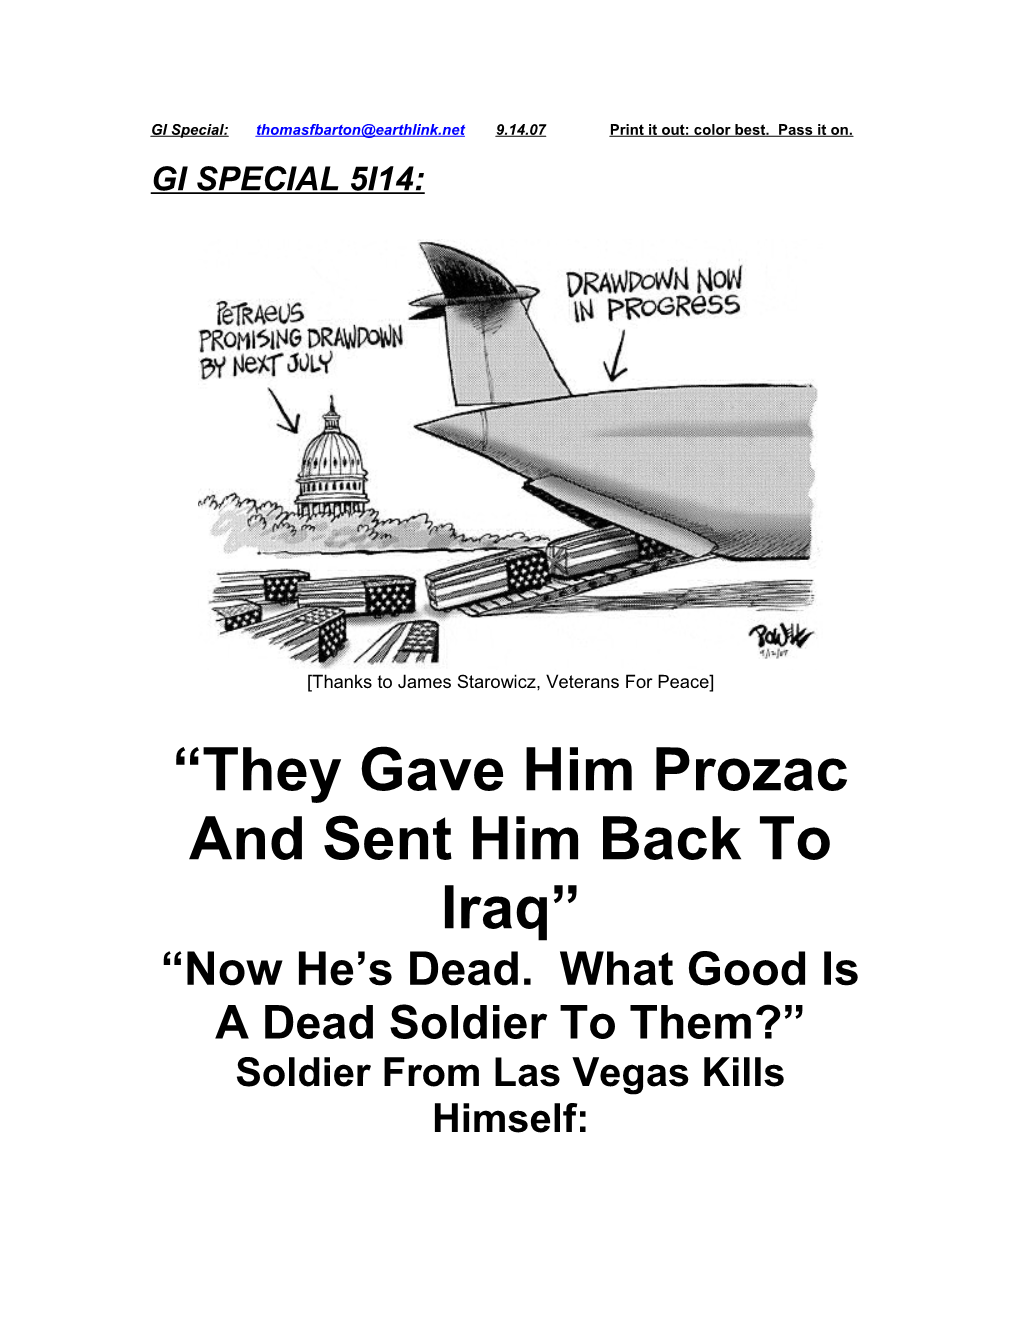 They Gave Him Prozac and Sent Him Back to Iraq